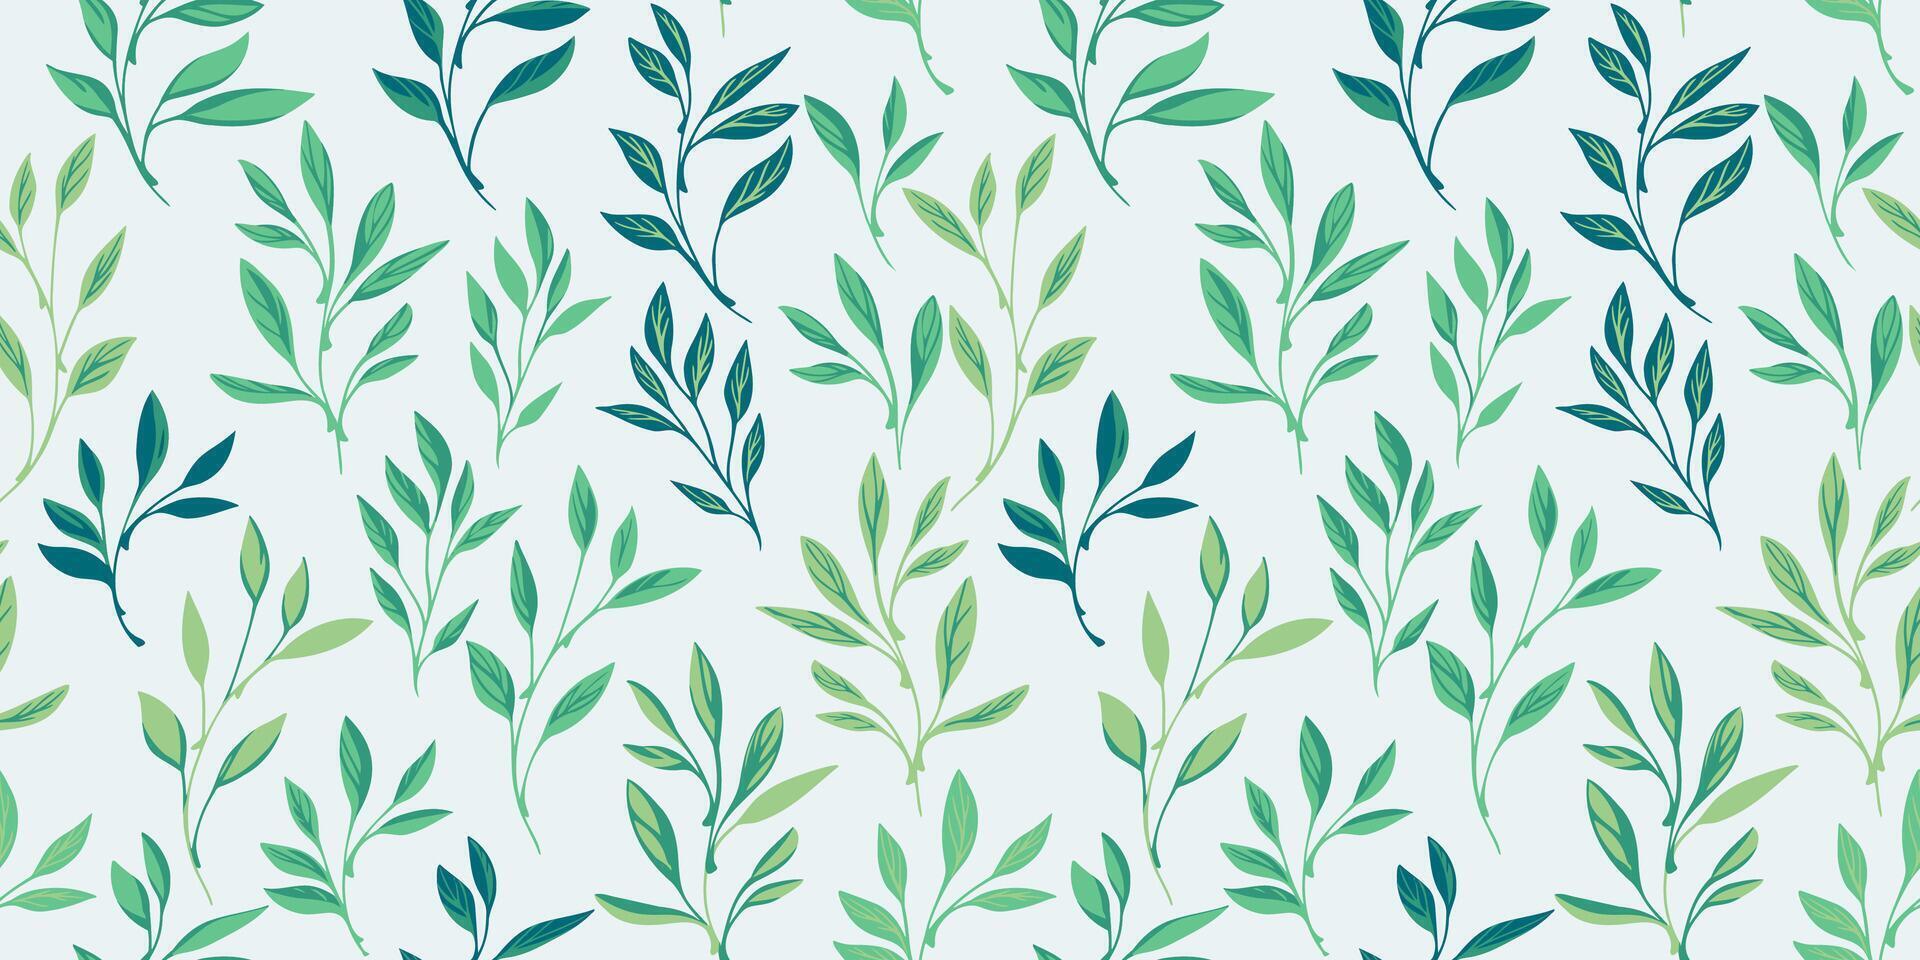 Abstract  simple tiny leaf branches seamless pattern. Green leaves on a white background. Vector hand drawn. Template for designs, textile, surface design, fabric